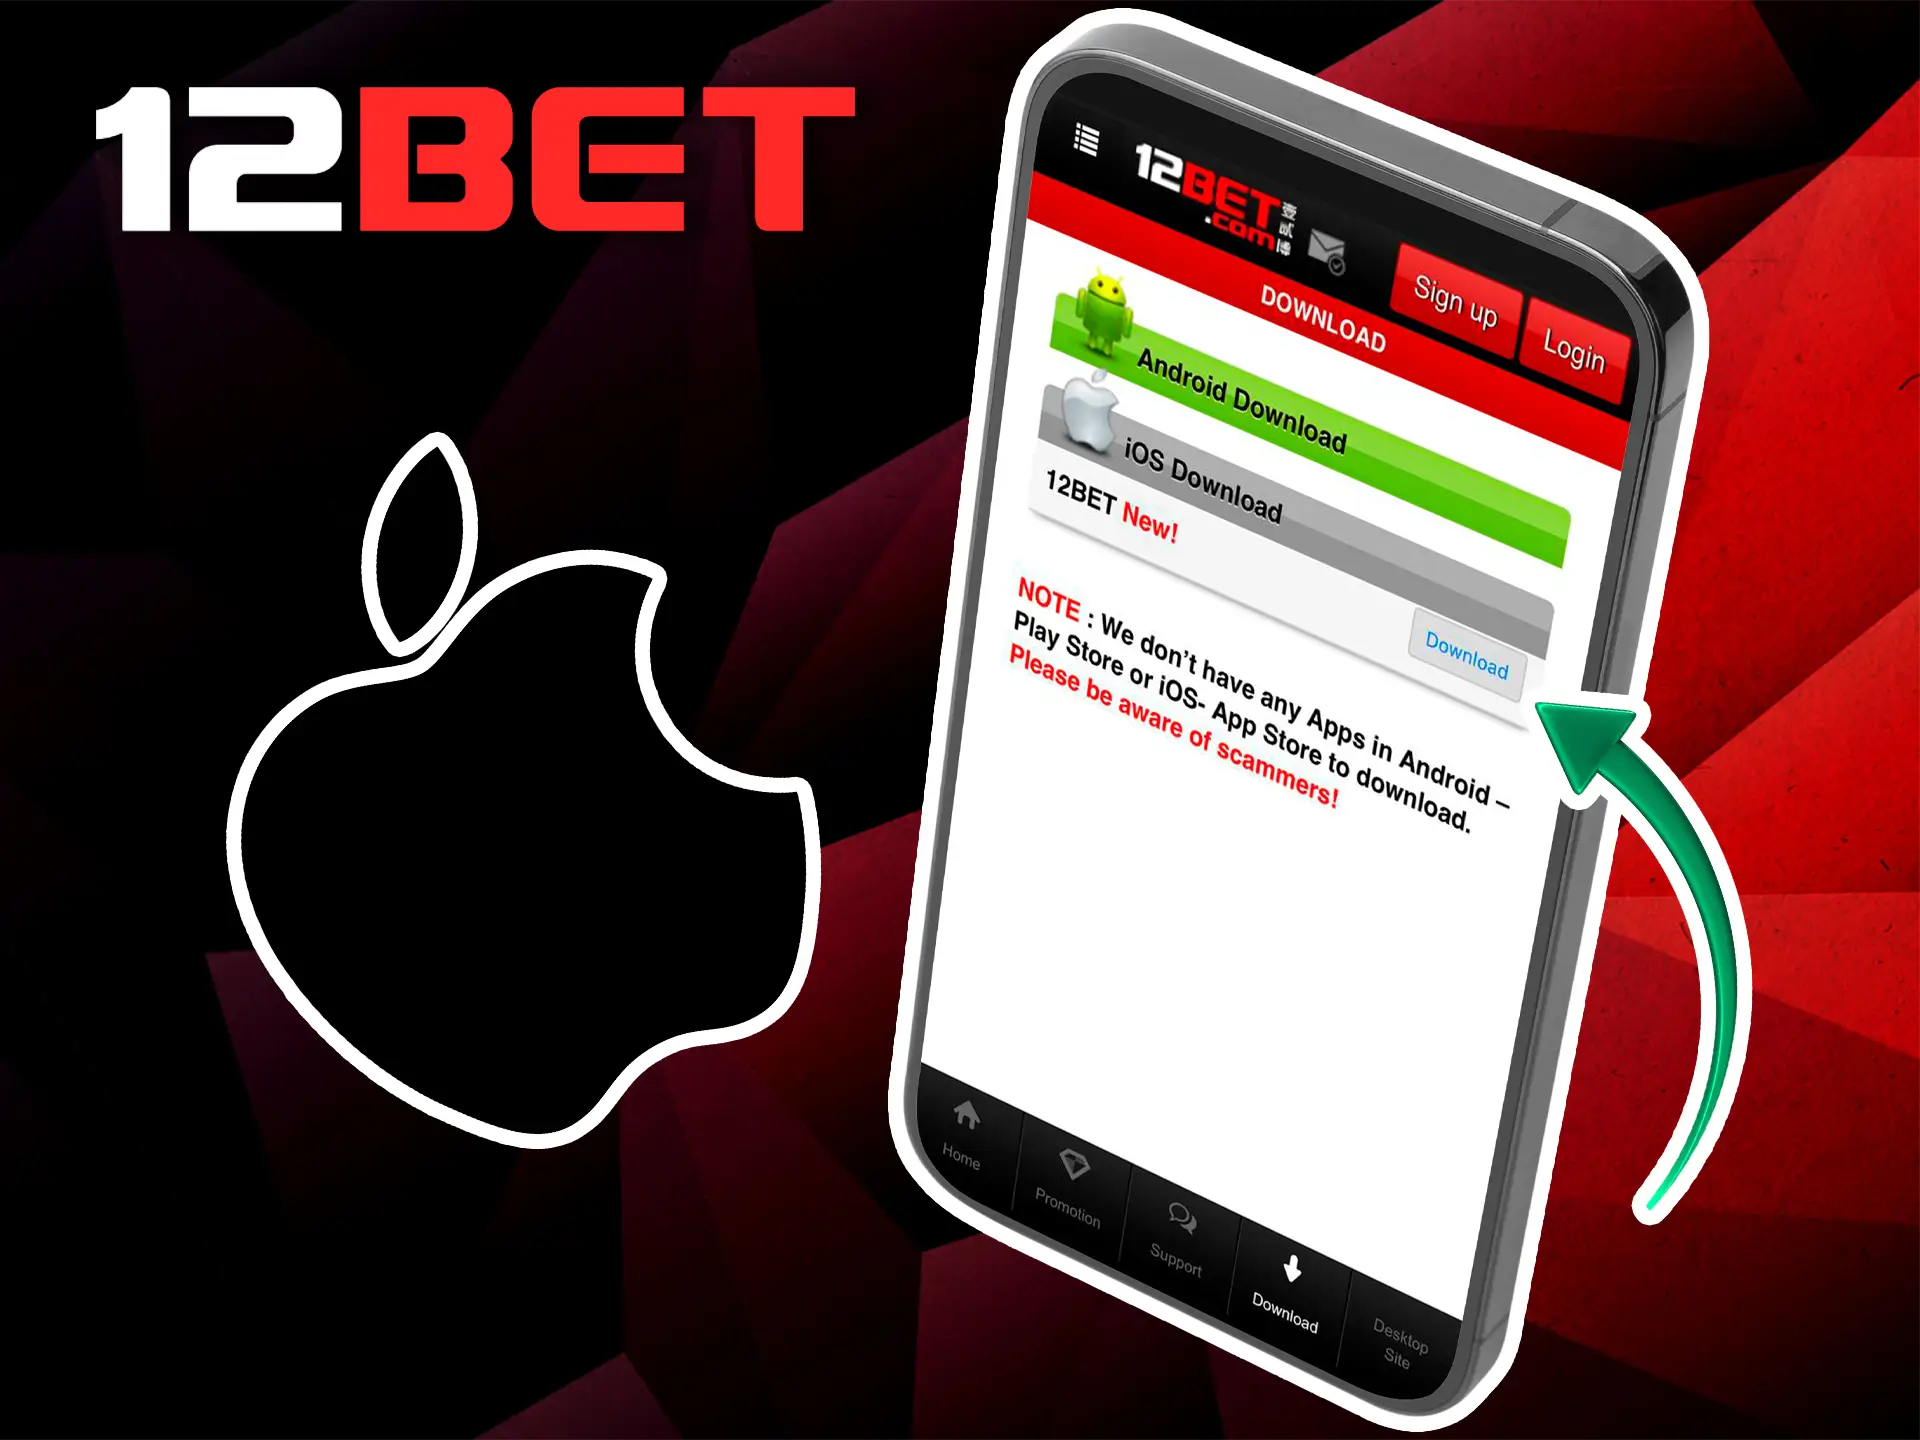 Juicy graphics and smooth operation, you'll find it all in the 12Bet app for iOS.